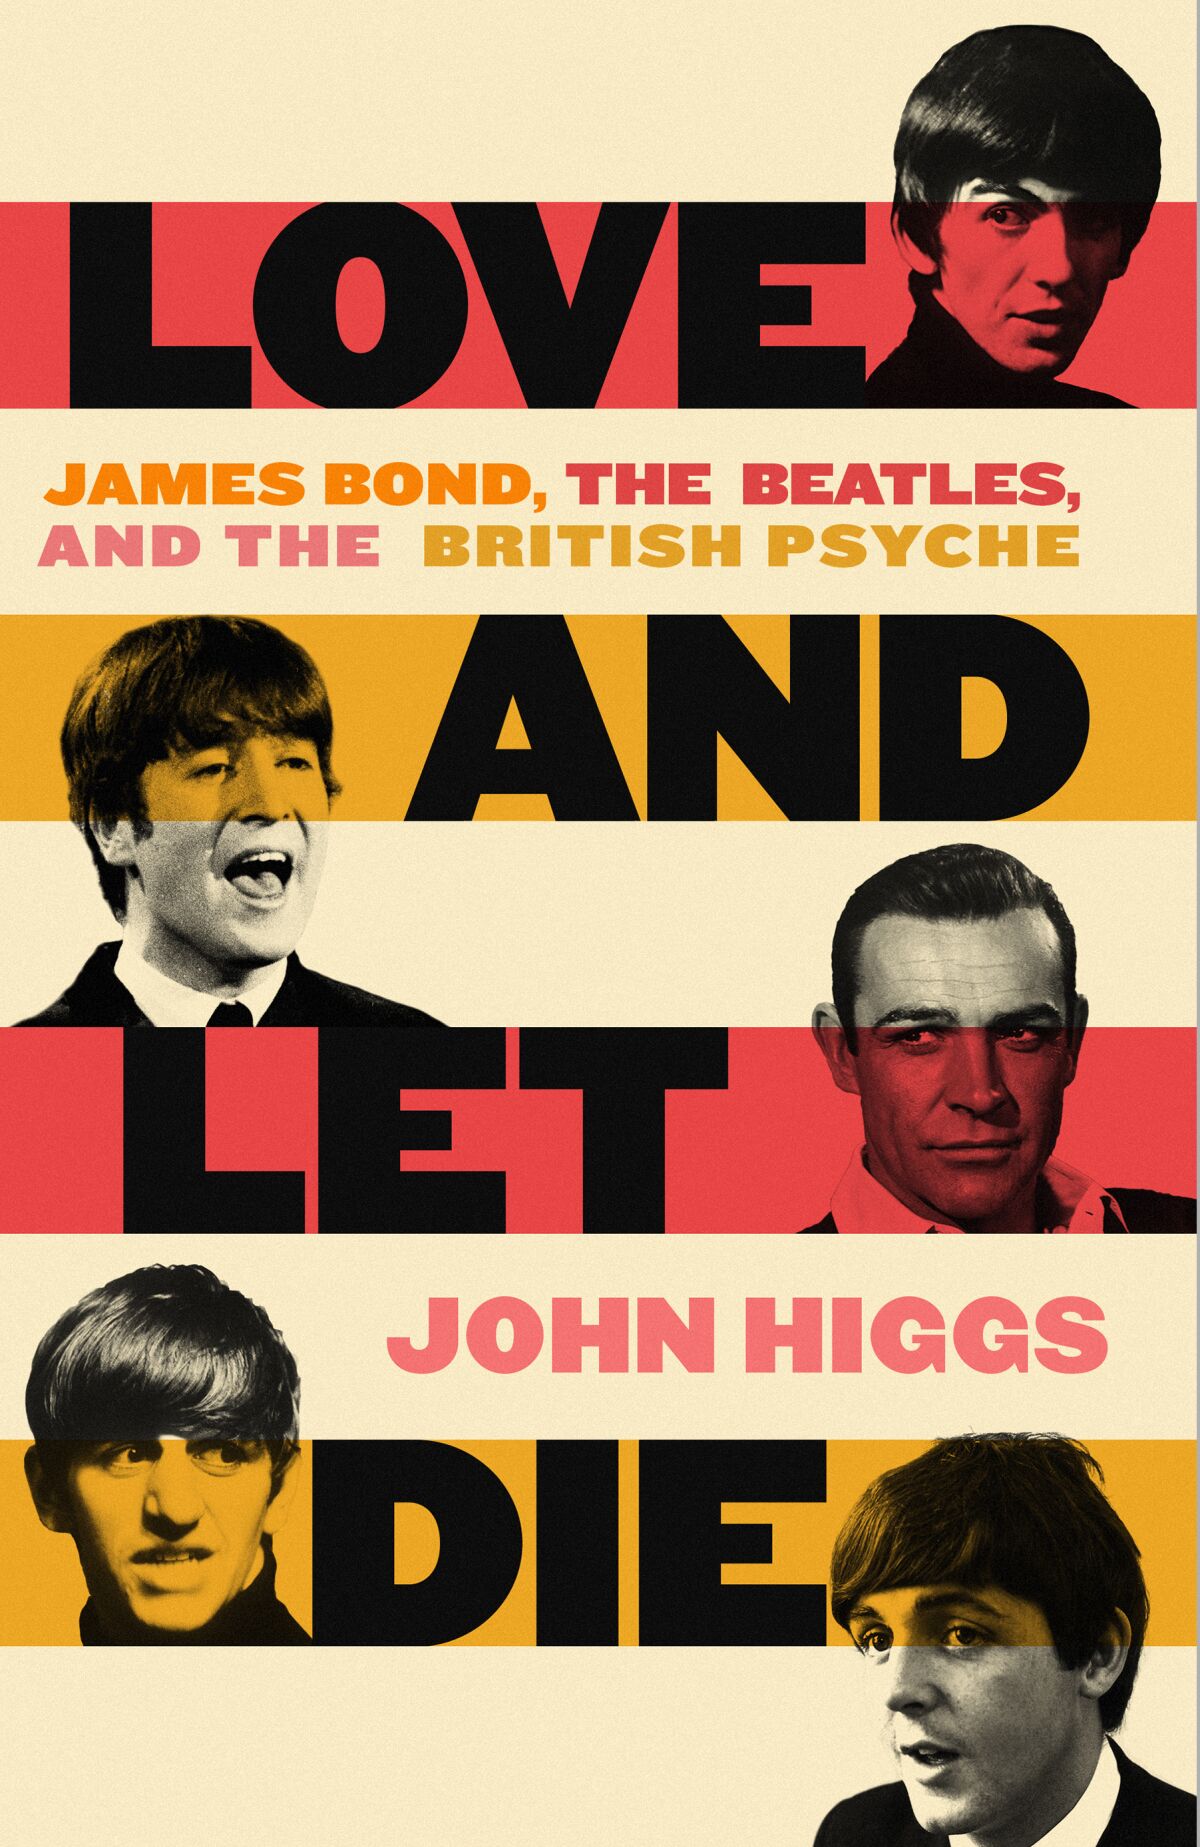 The book's cover juxtaposes photos of the four Beatles with Sean Connery's James Bond.